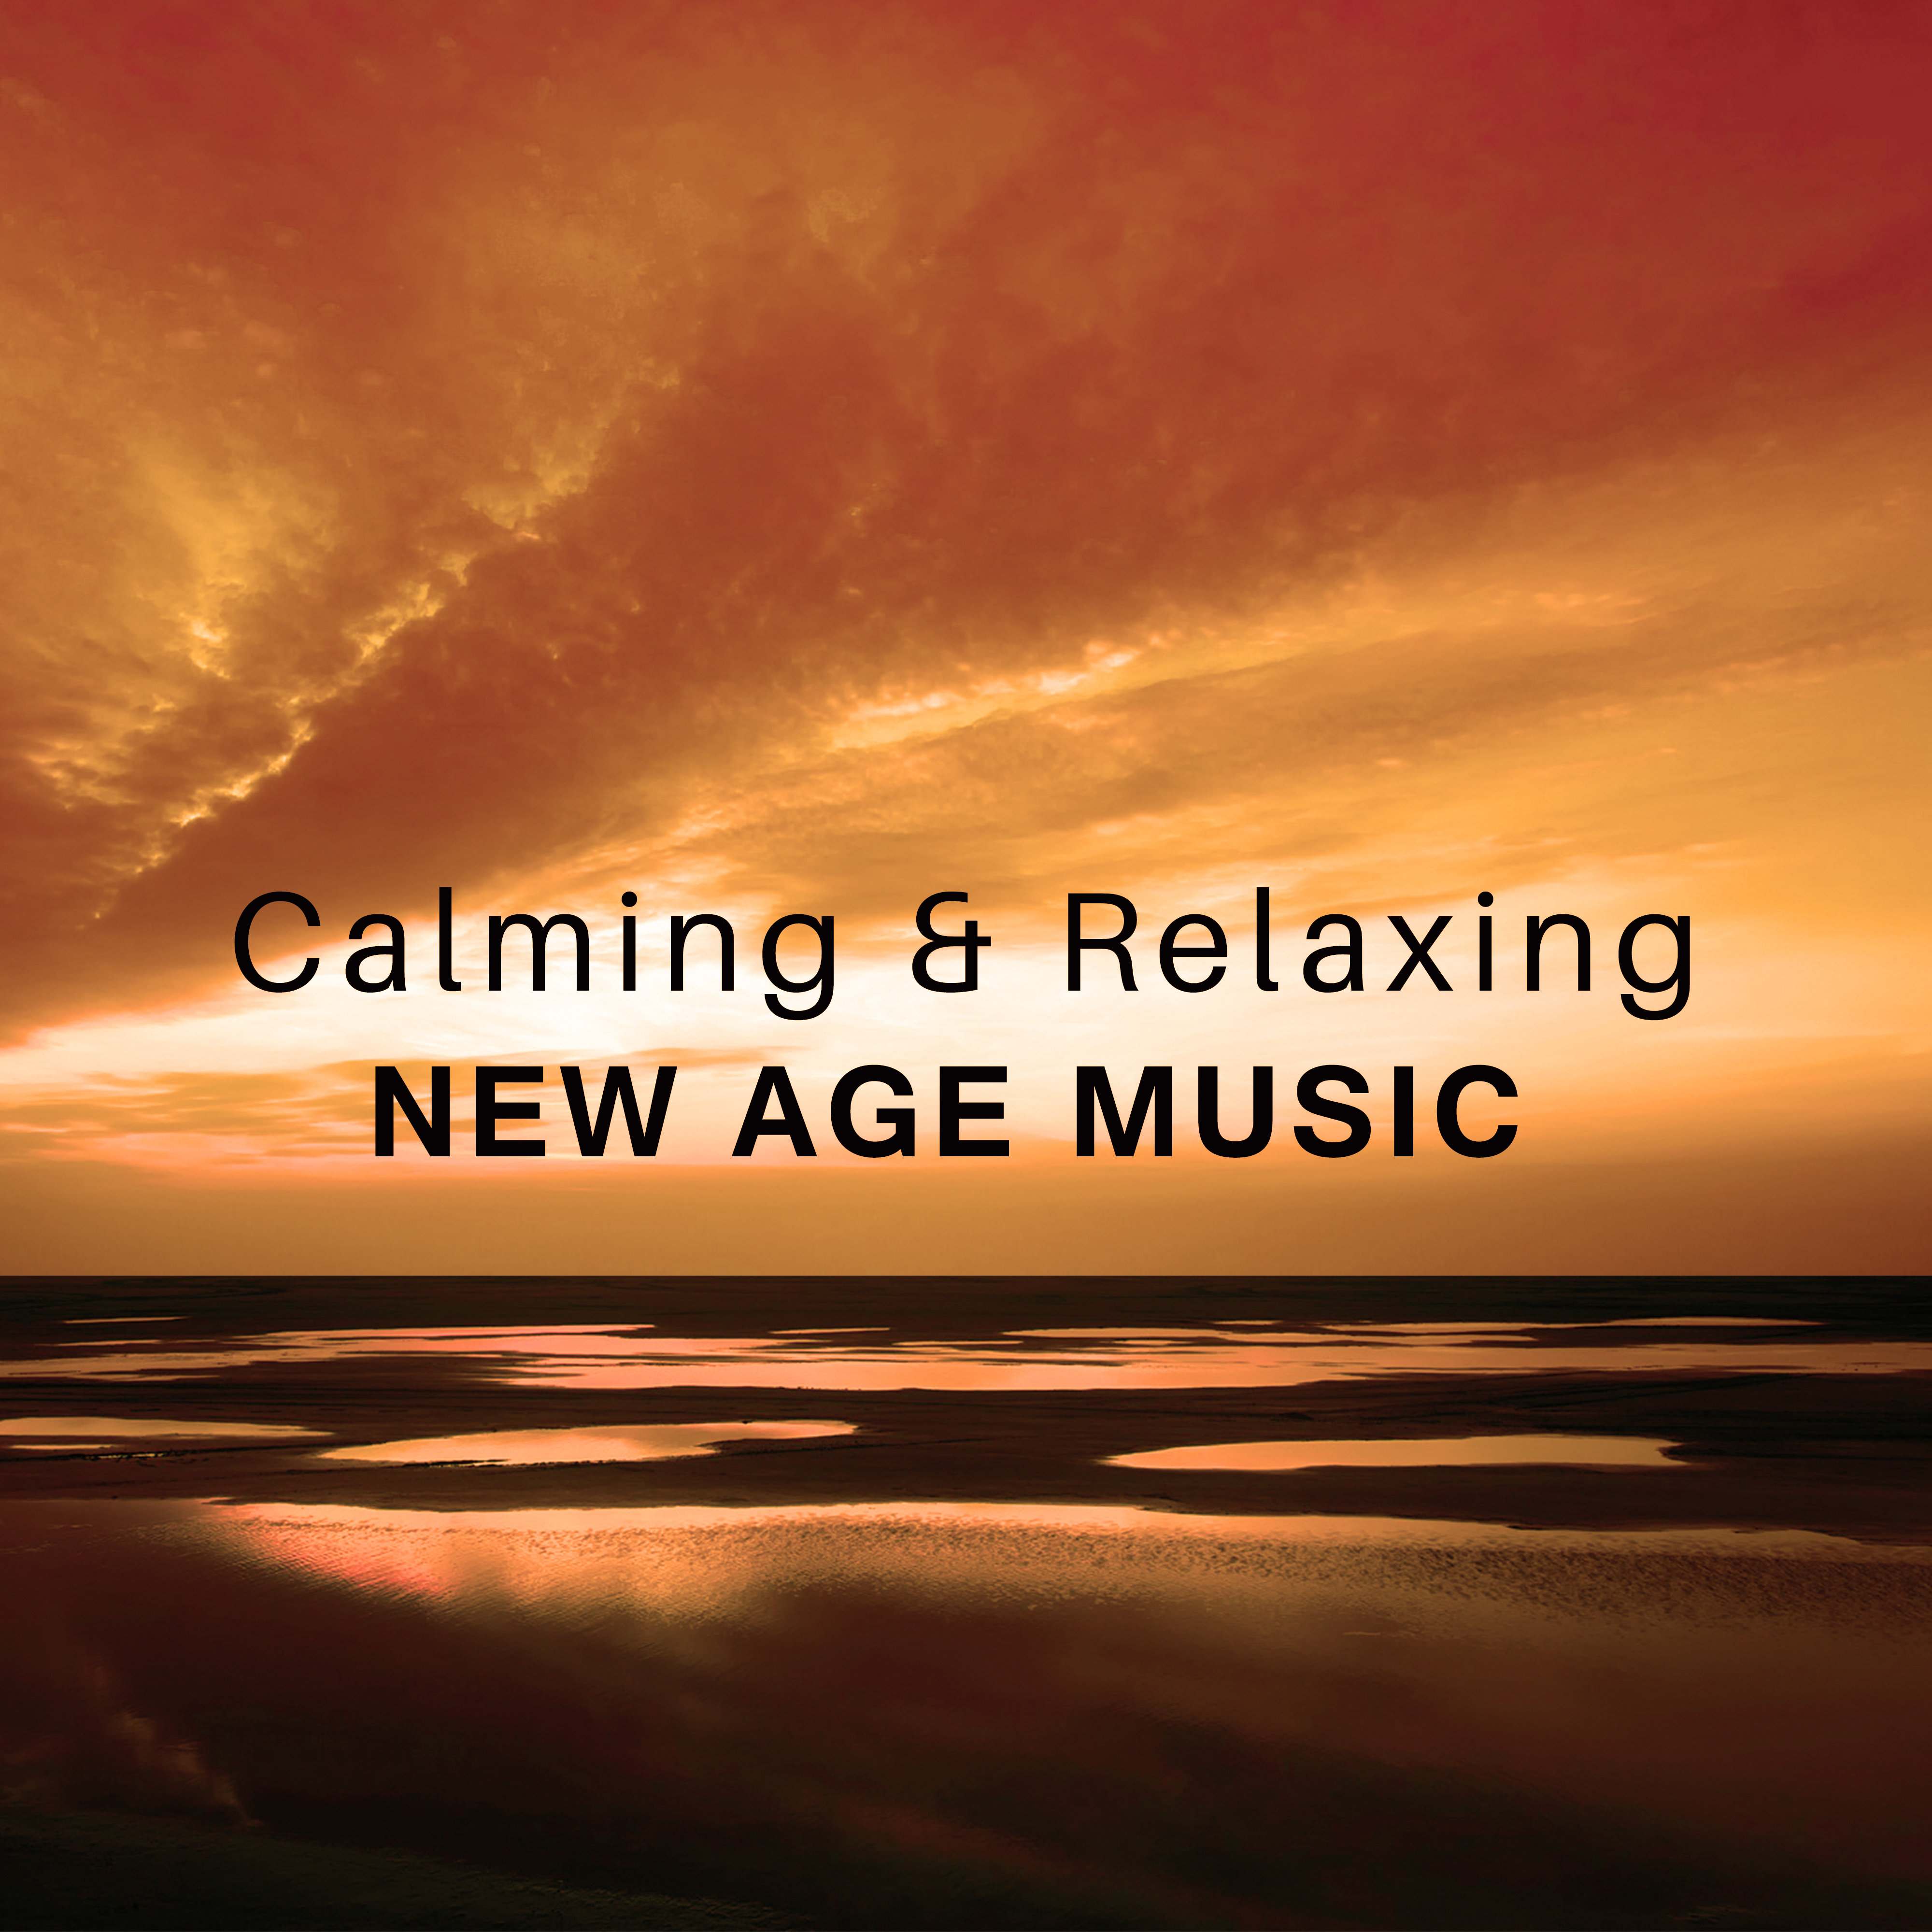 Calming  Relaxing New Age Music  Calm Down  Rest, Spirit Relaxation, Soul Harmony, Chilled Music, Sounds to Relax